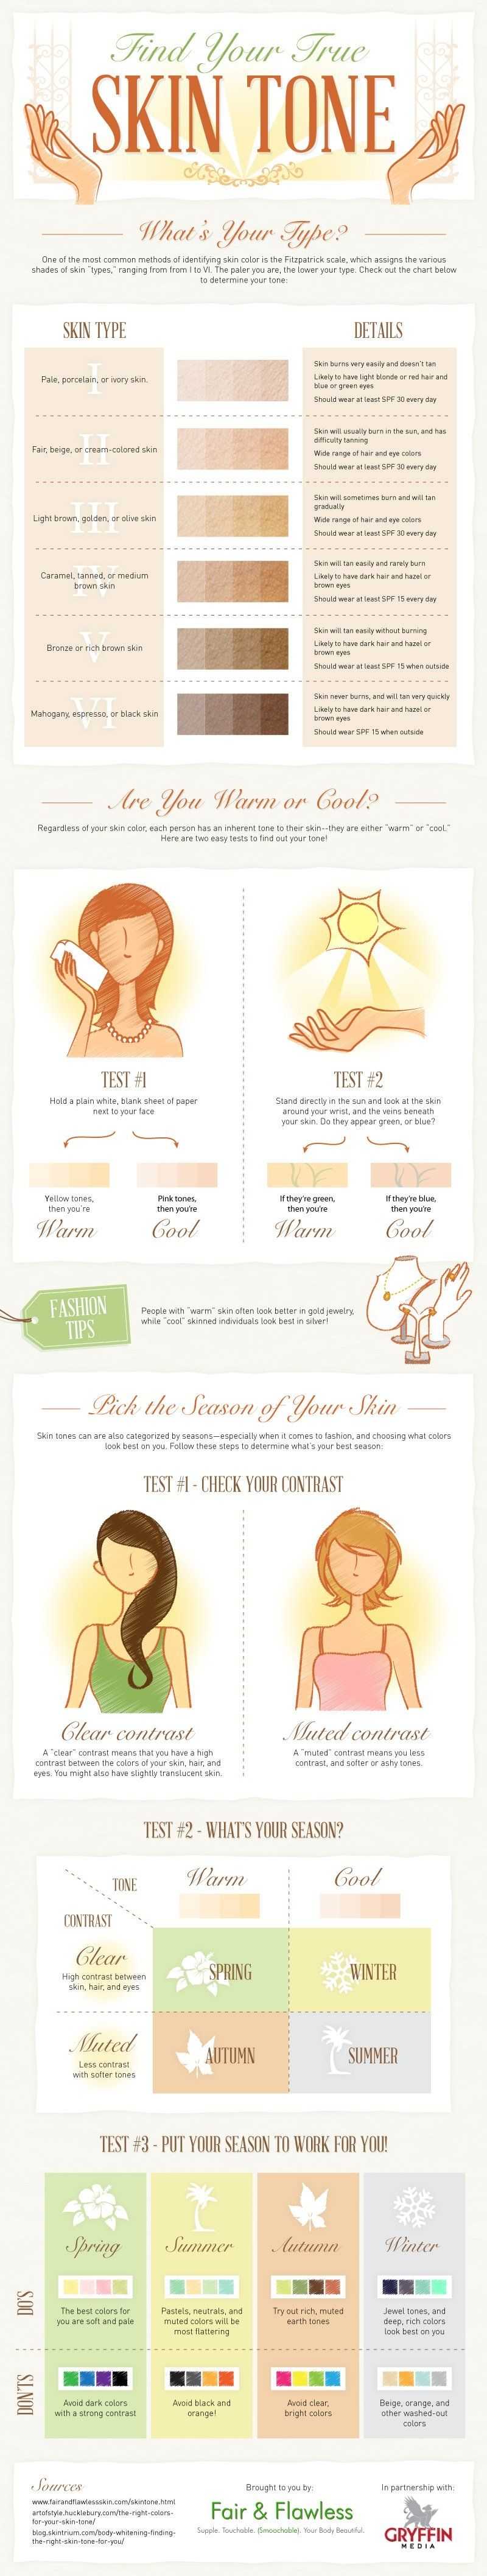 How To Find Your True Skin Tone